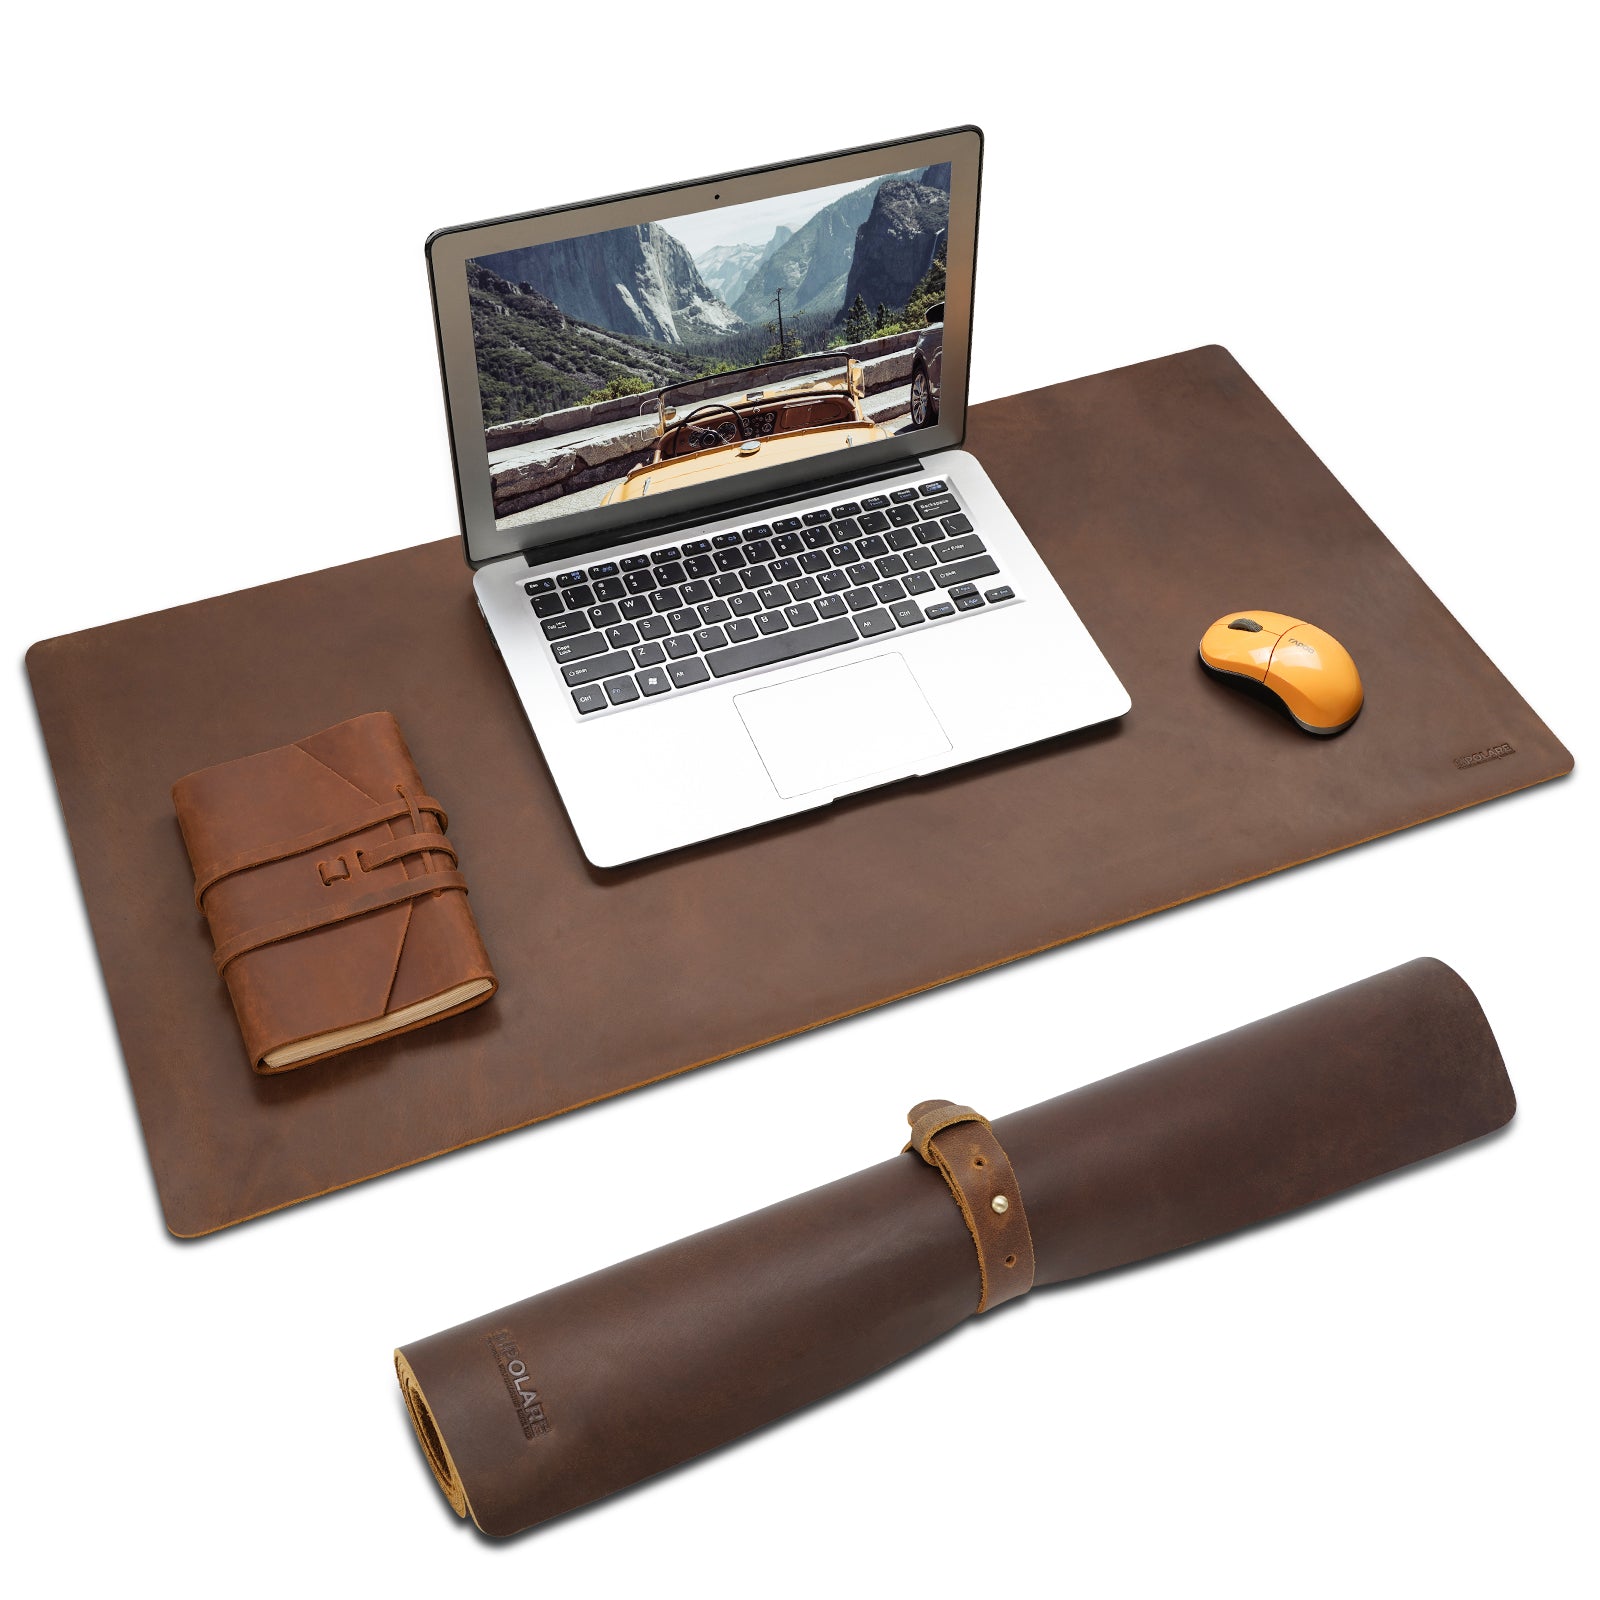 Polare 2mm Thick Large Full Grain Leather Desk Pad Protector (Dark Brown)